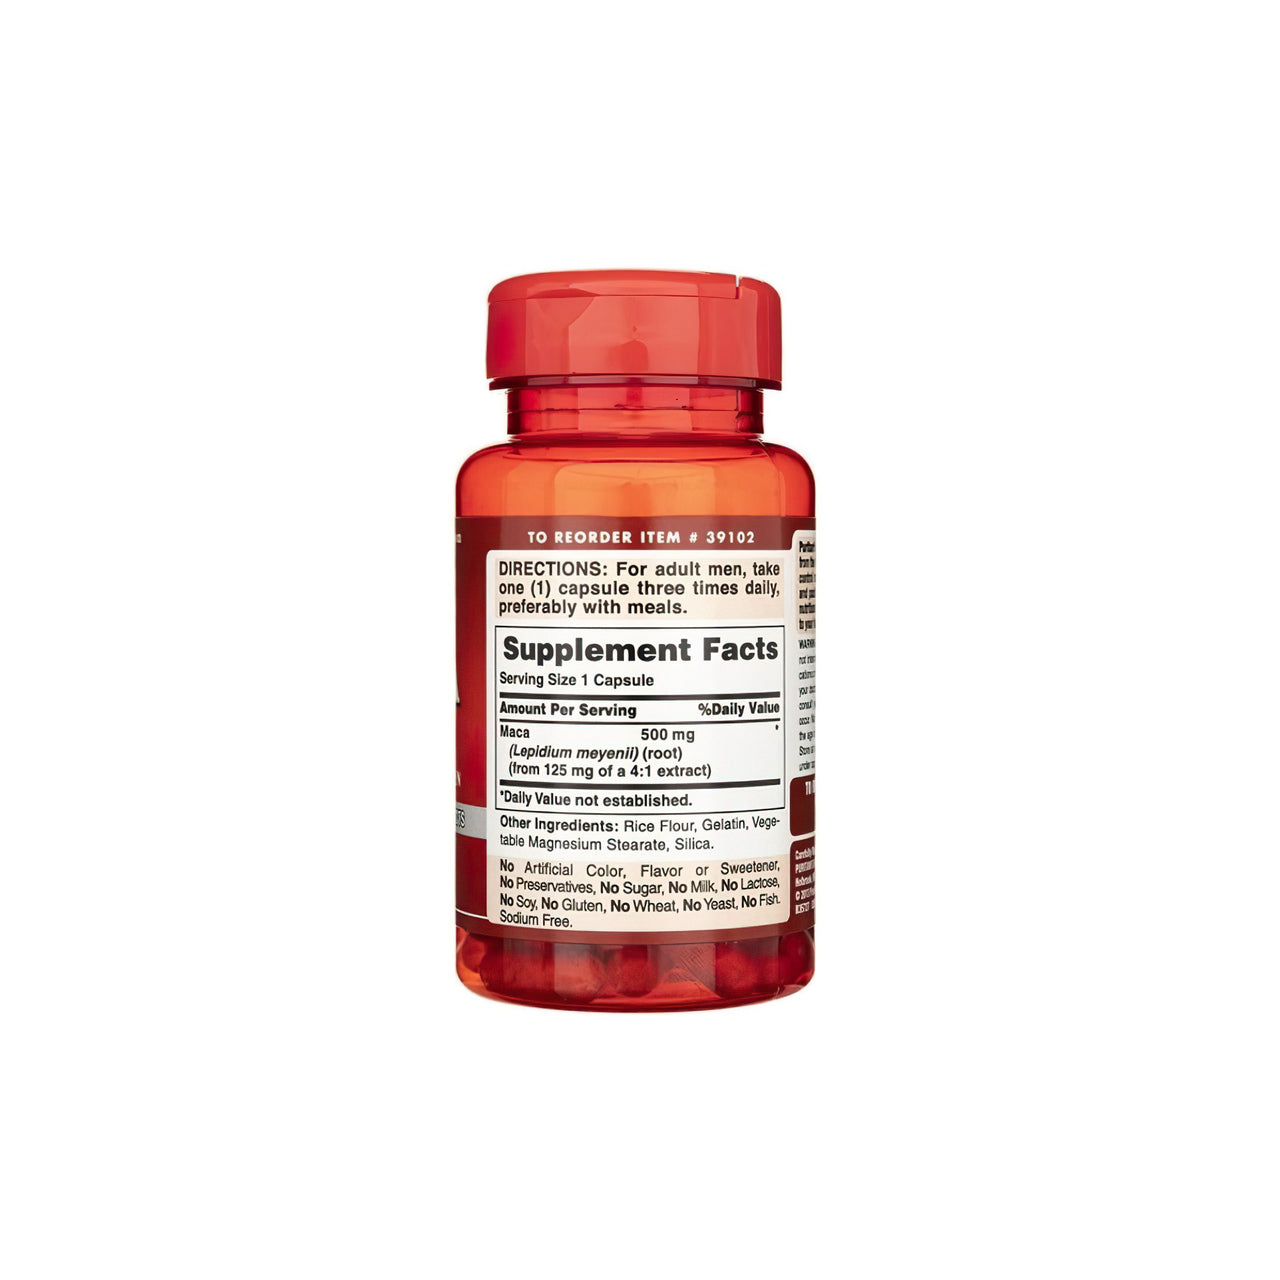 A bottle of Maca 500 mg 60 Rapid Release Capsules by Puritan's Pride on a white background.